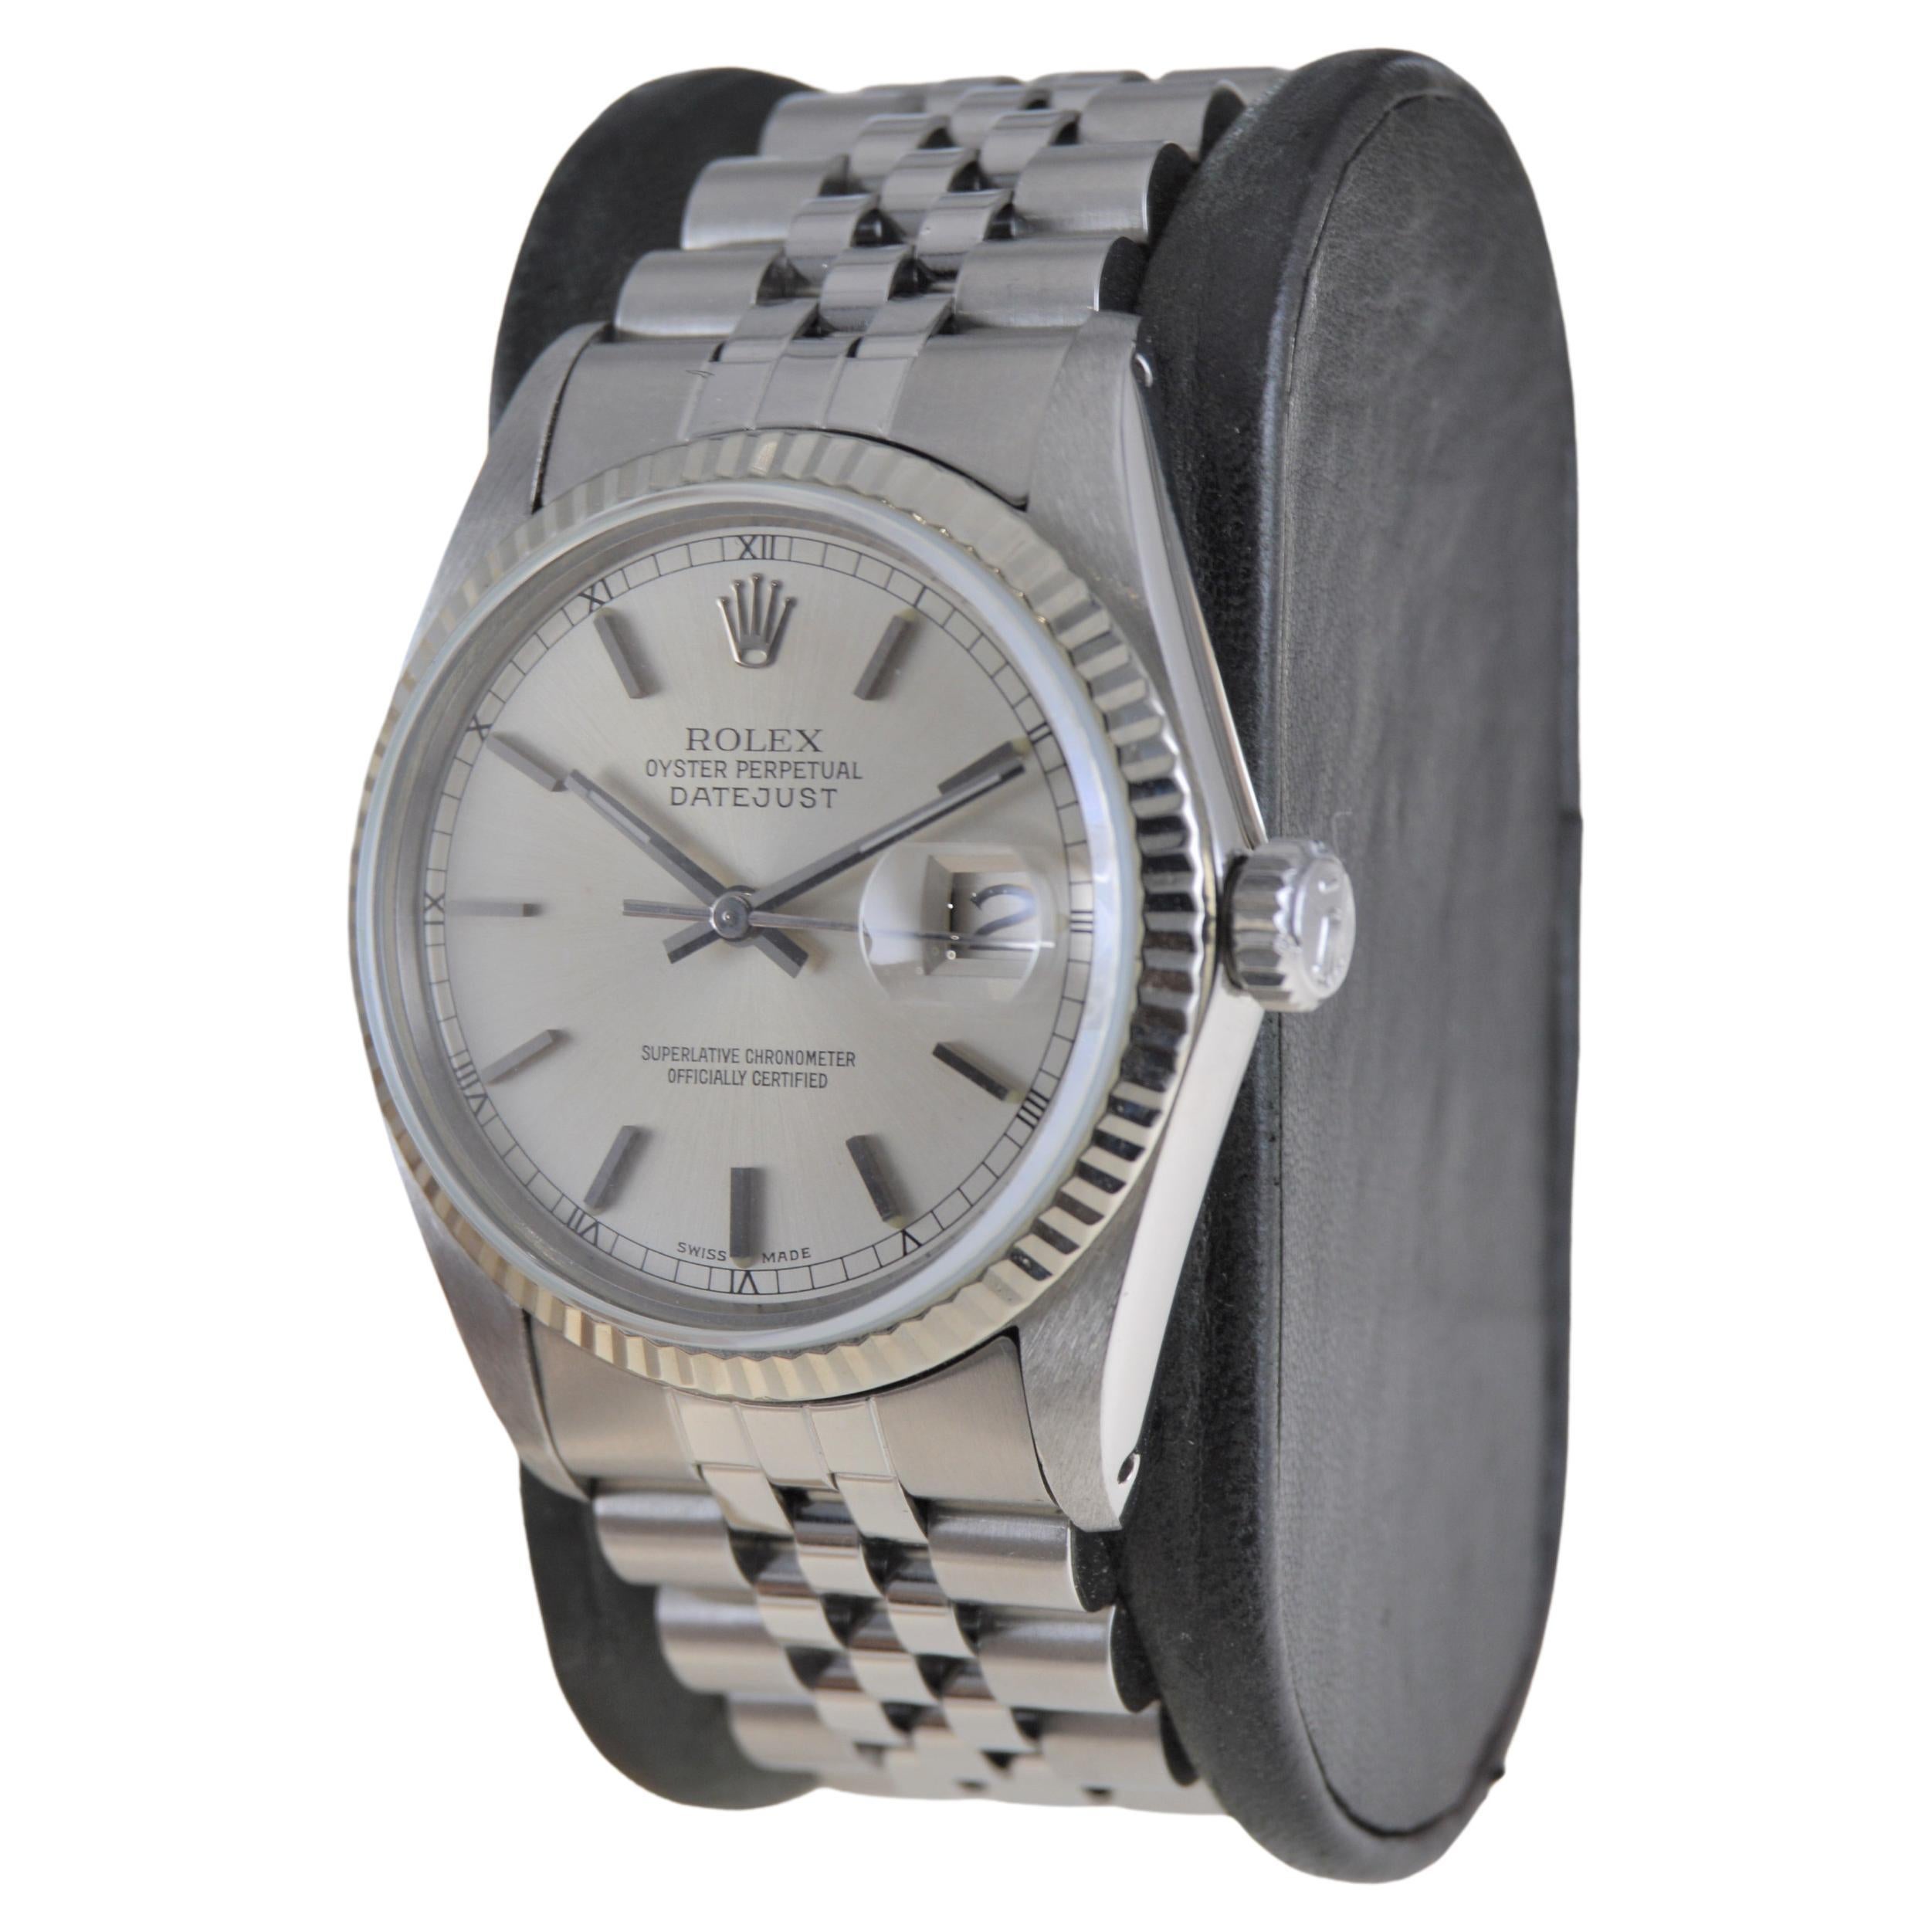 rolex oyster perpetual datejust price